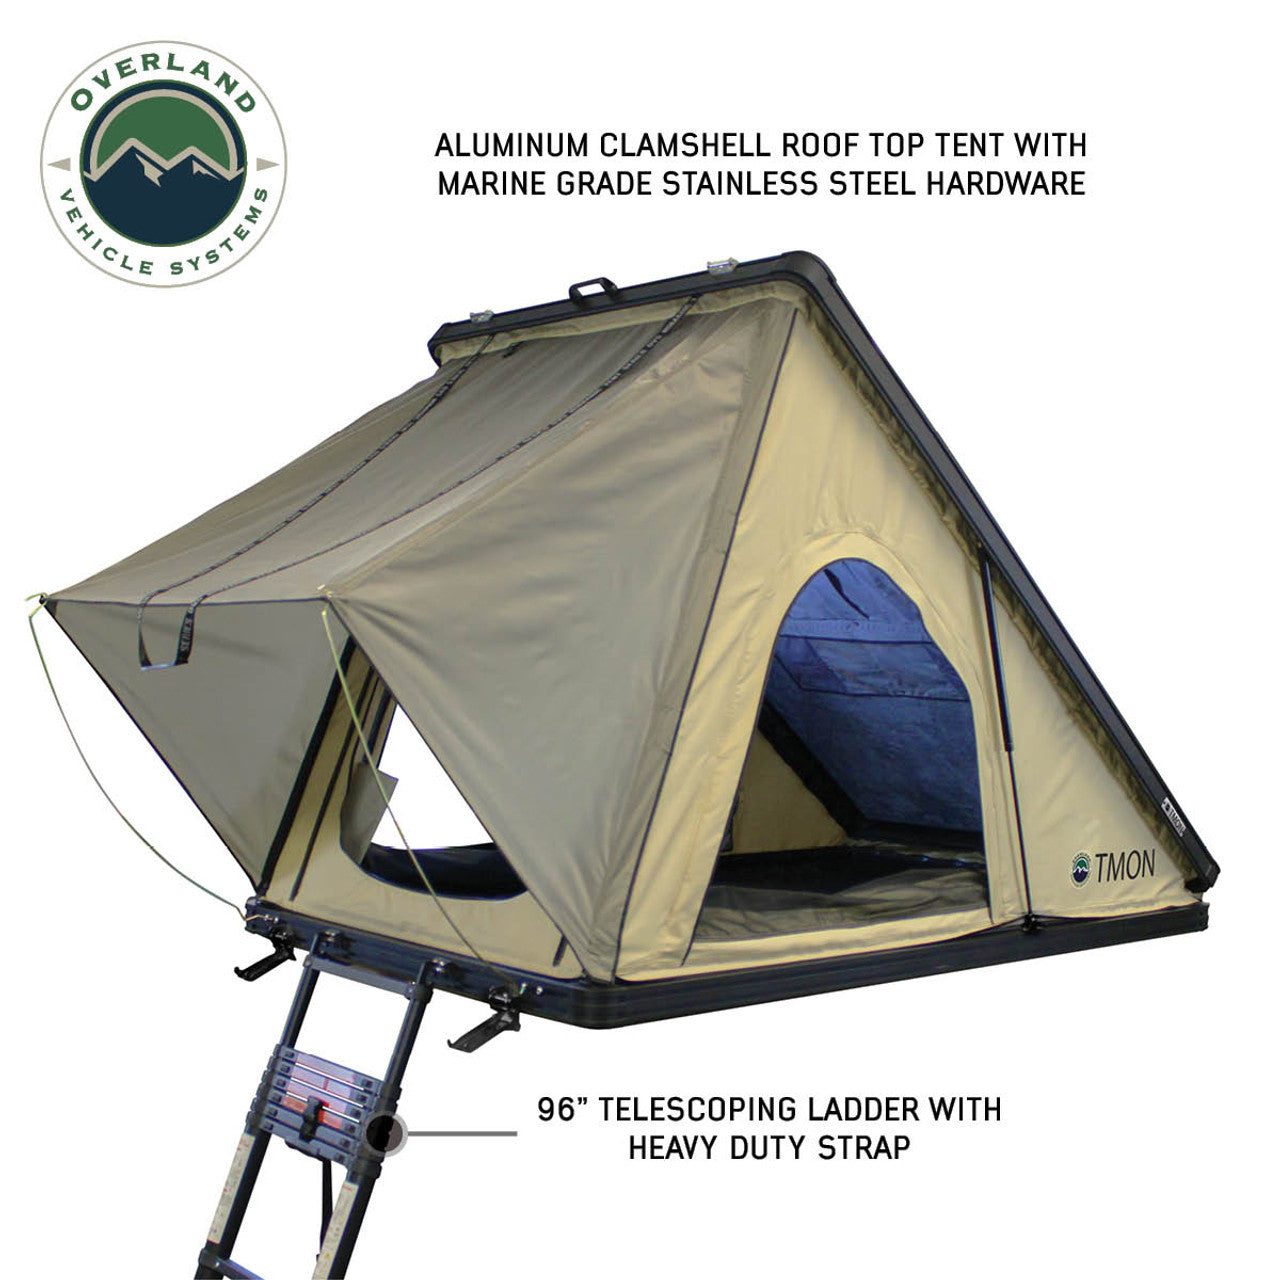 LD TMON Clamshell Aluminum Hard Shell Roof Top Tent - 2 Person 18119935